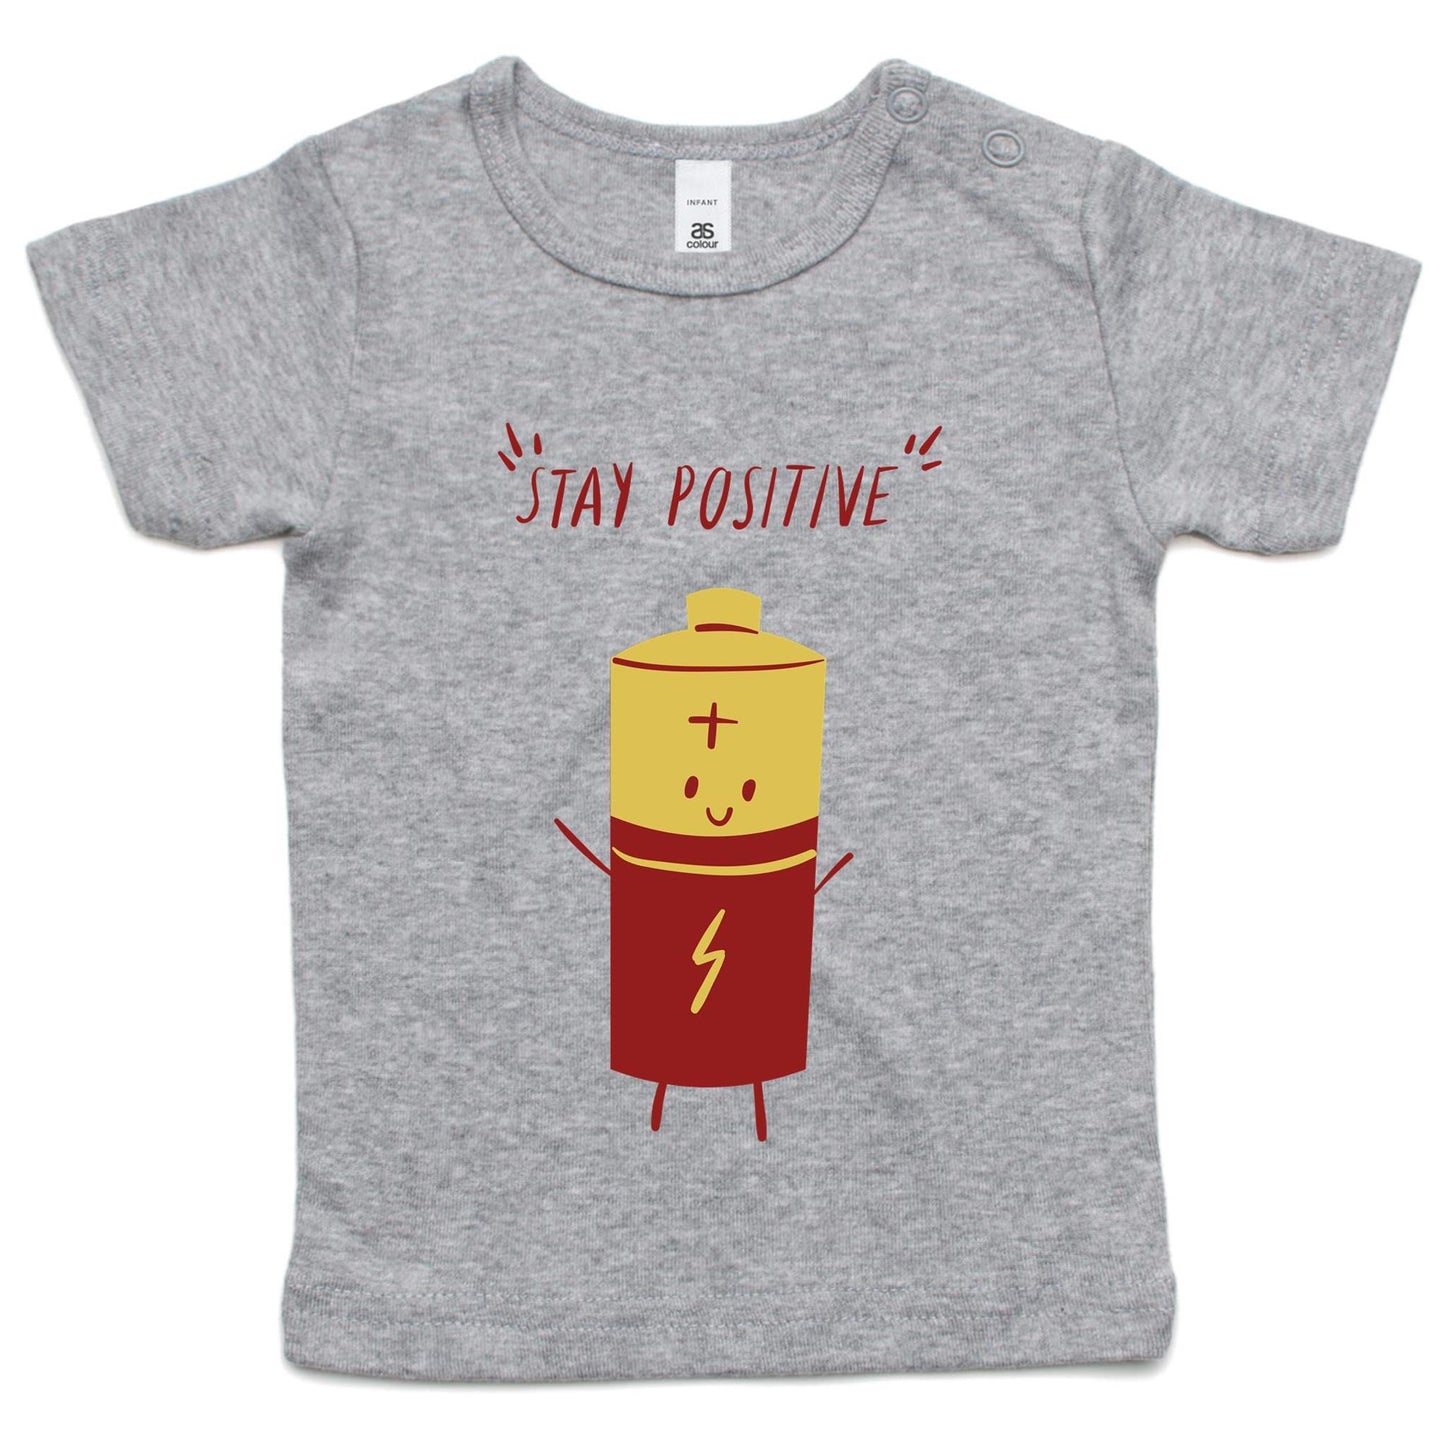 Stay Positive - Baby T-shirt Grey Marle Baby T-shirt kids